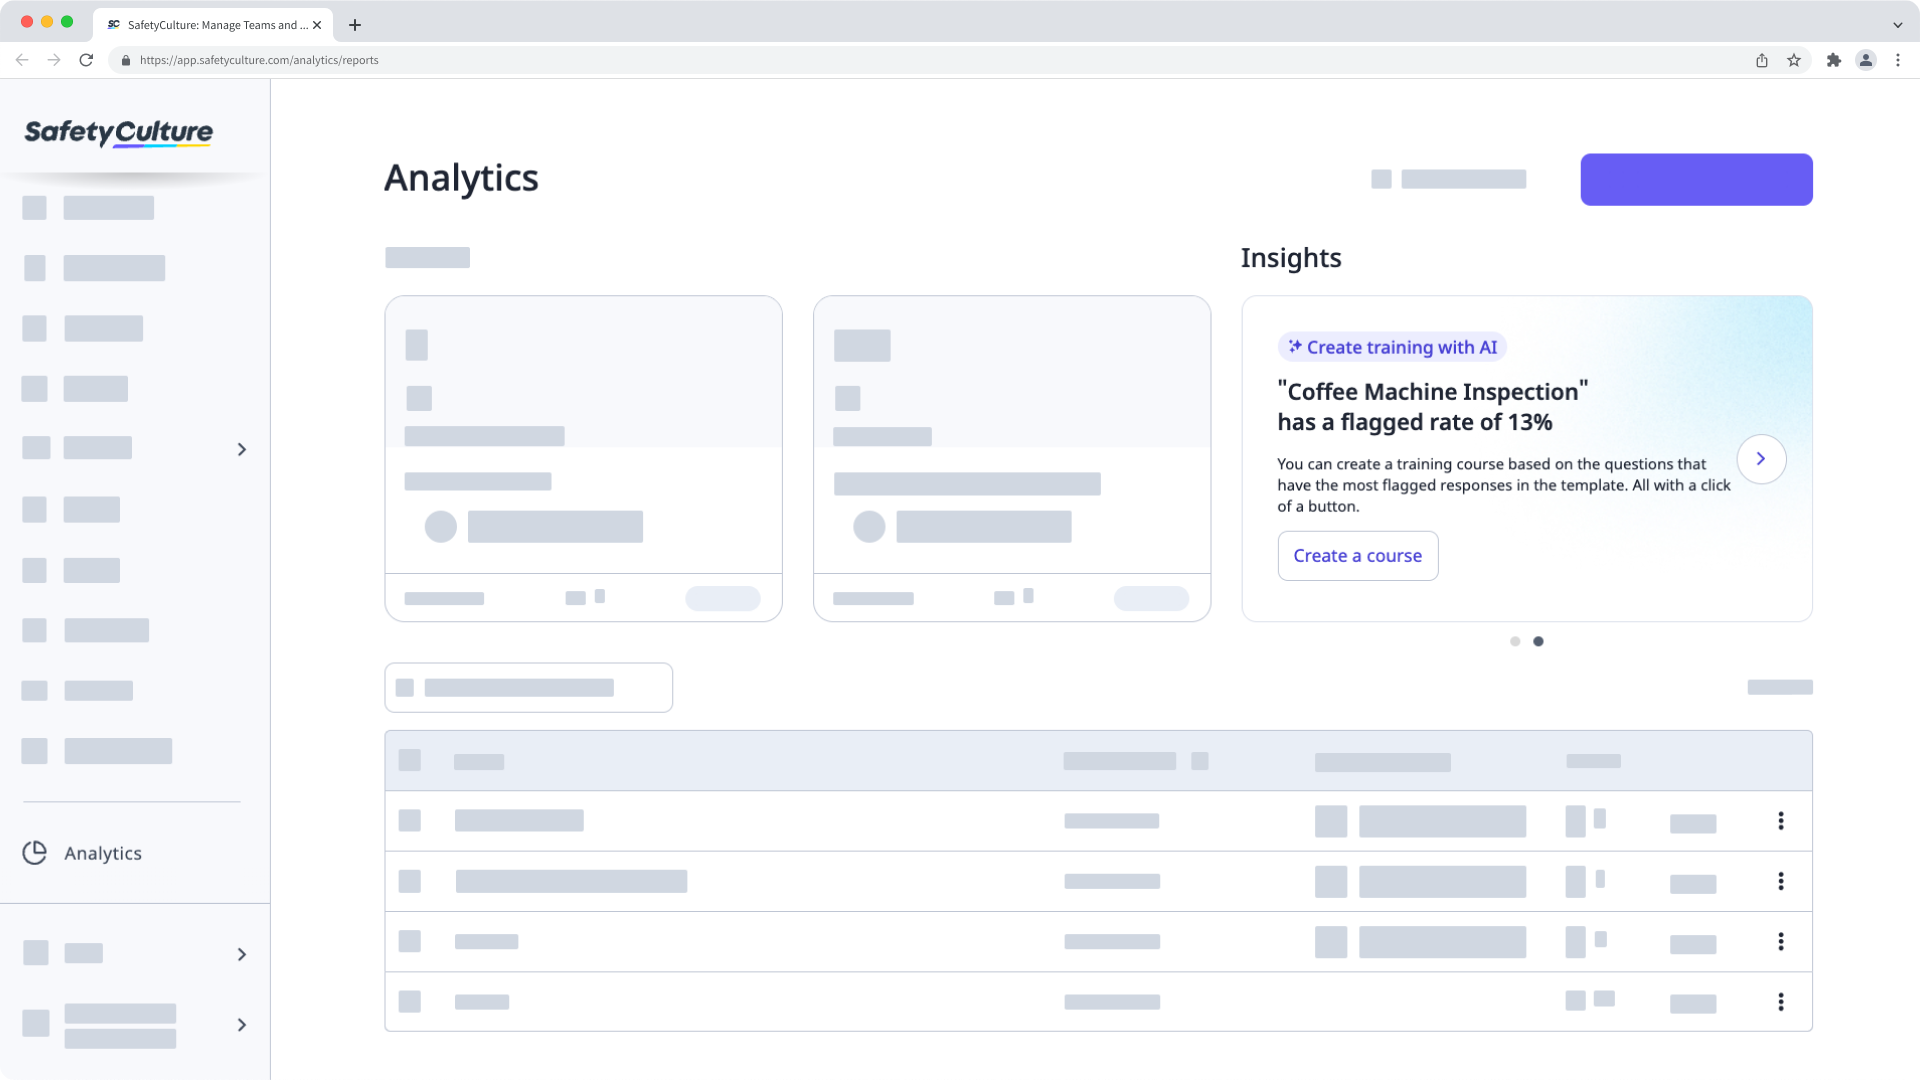 Create a training course from inspection flagged item trends in Analytics.